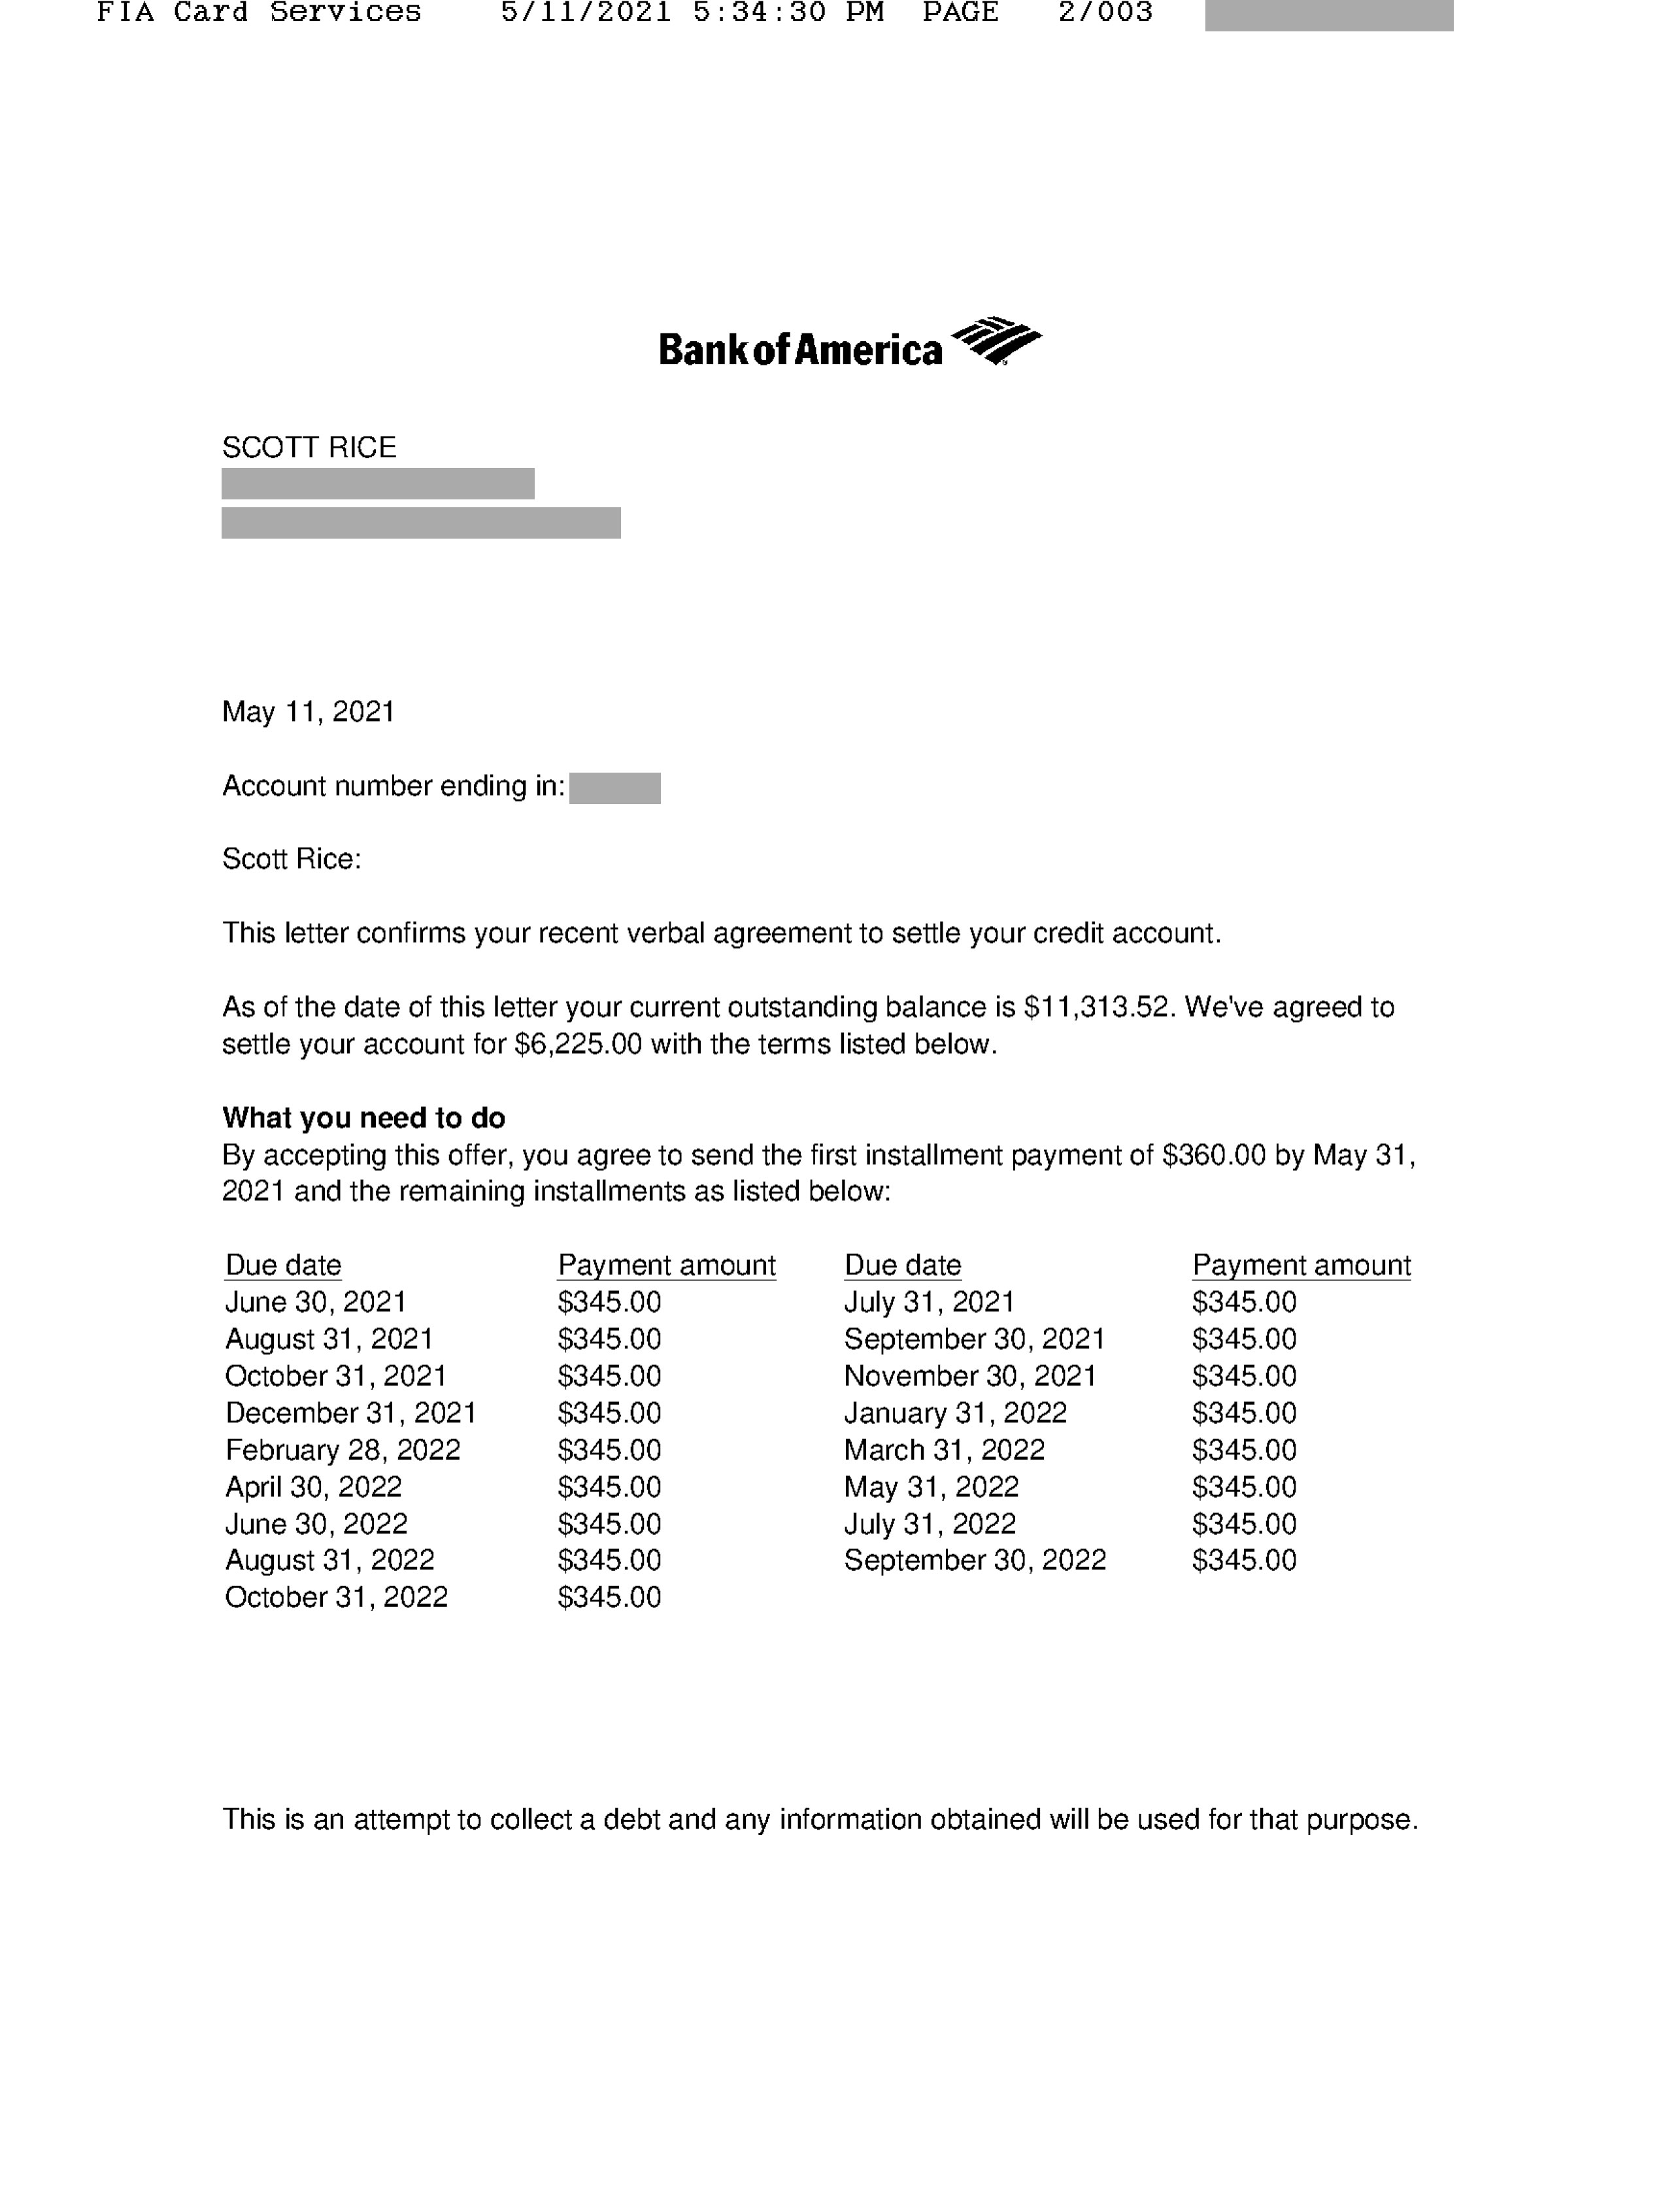 Saved $5088 with Bank Of America for Client SR